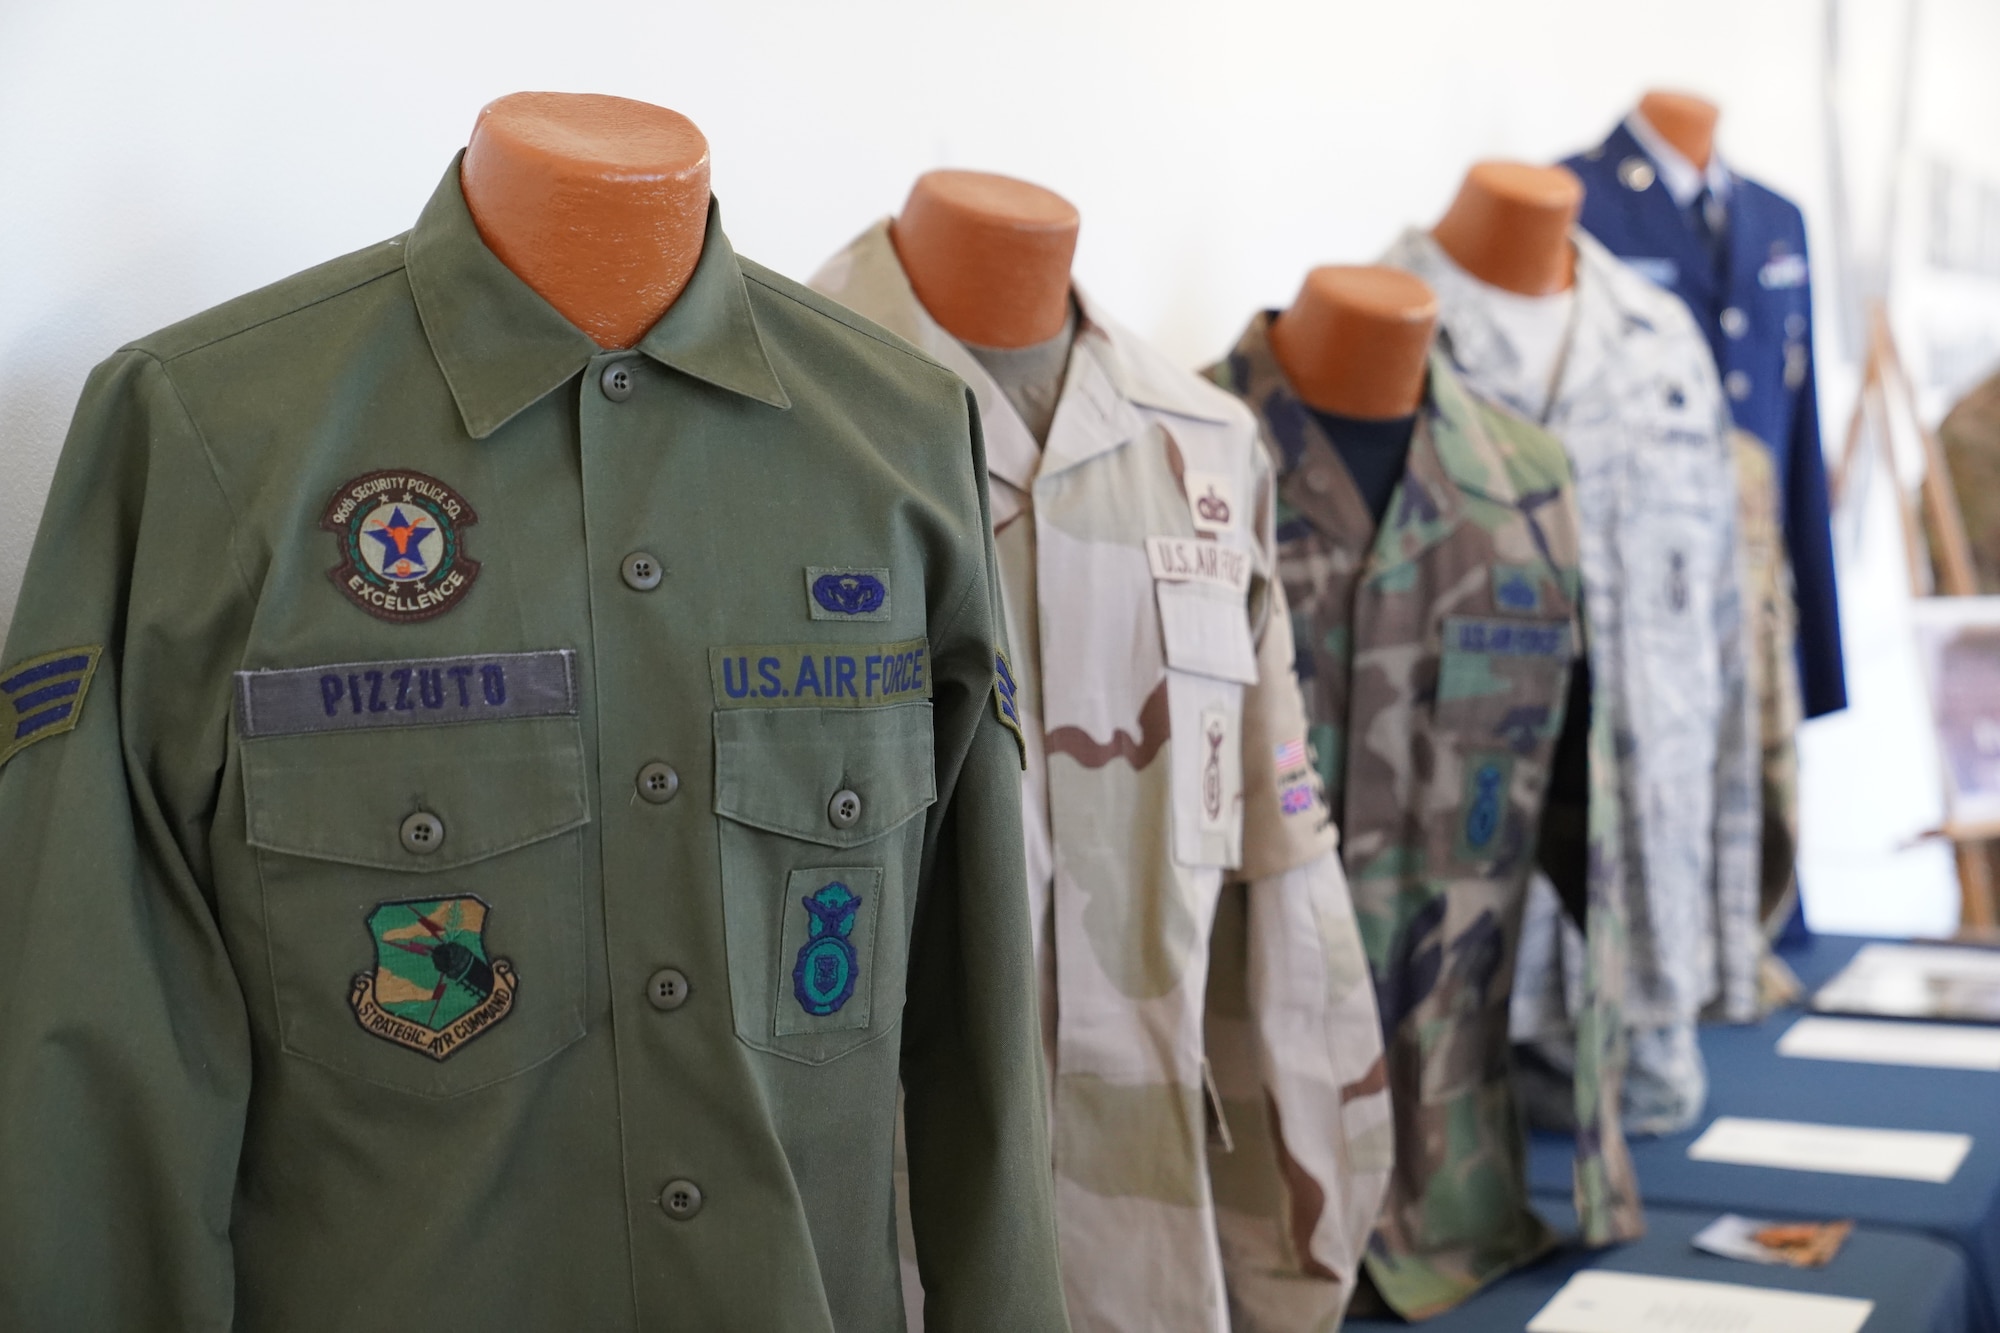 Uniforms owned by Chief Master Sgt. David Pizzuto, 81st Training Wing command chief, are displayed inside of the Levitow Training Support Facility at Keesler Air Force Base, Mississippi, May 6, 2020. Pizzuto, who is slated to retire this month, has served for 37 years and has worn every uniform the Air Force has ever known. (U.S. Air Force photo by Airman 1st Class Spencer Tobler)